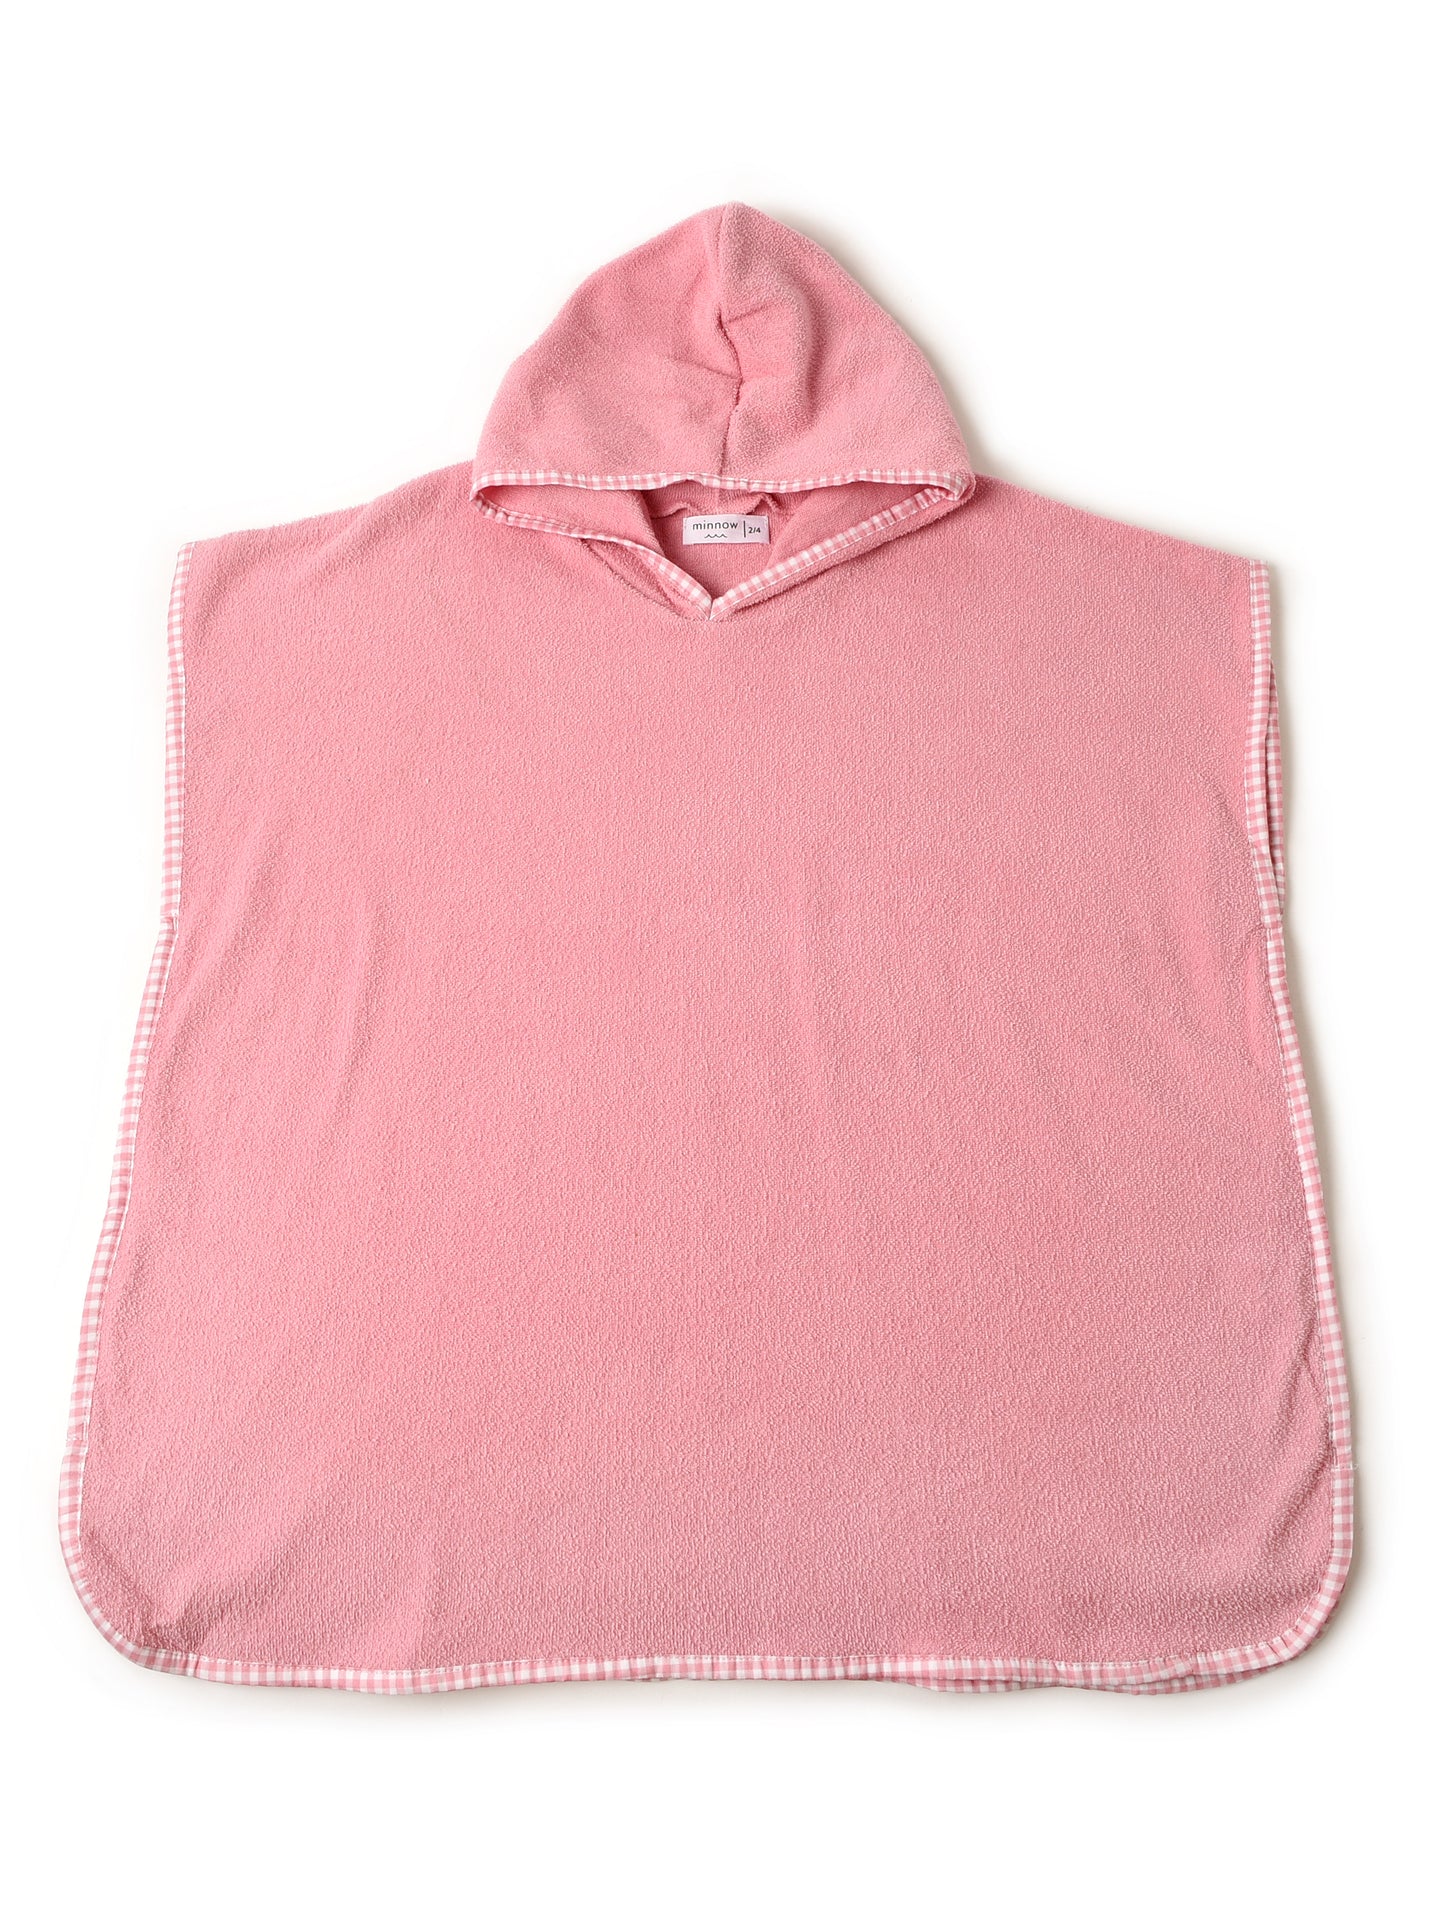 Minnow Kids' Unisex Hooded Cover-Up